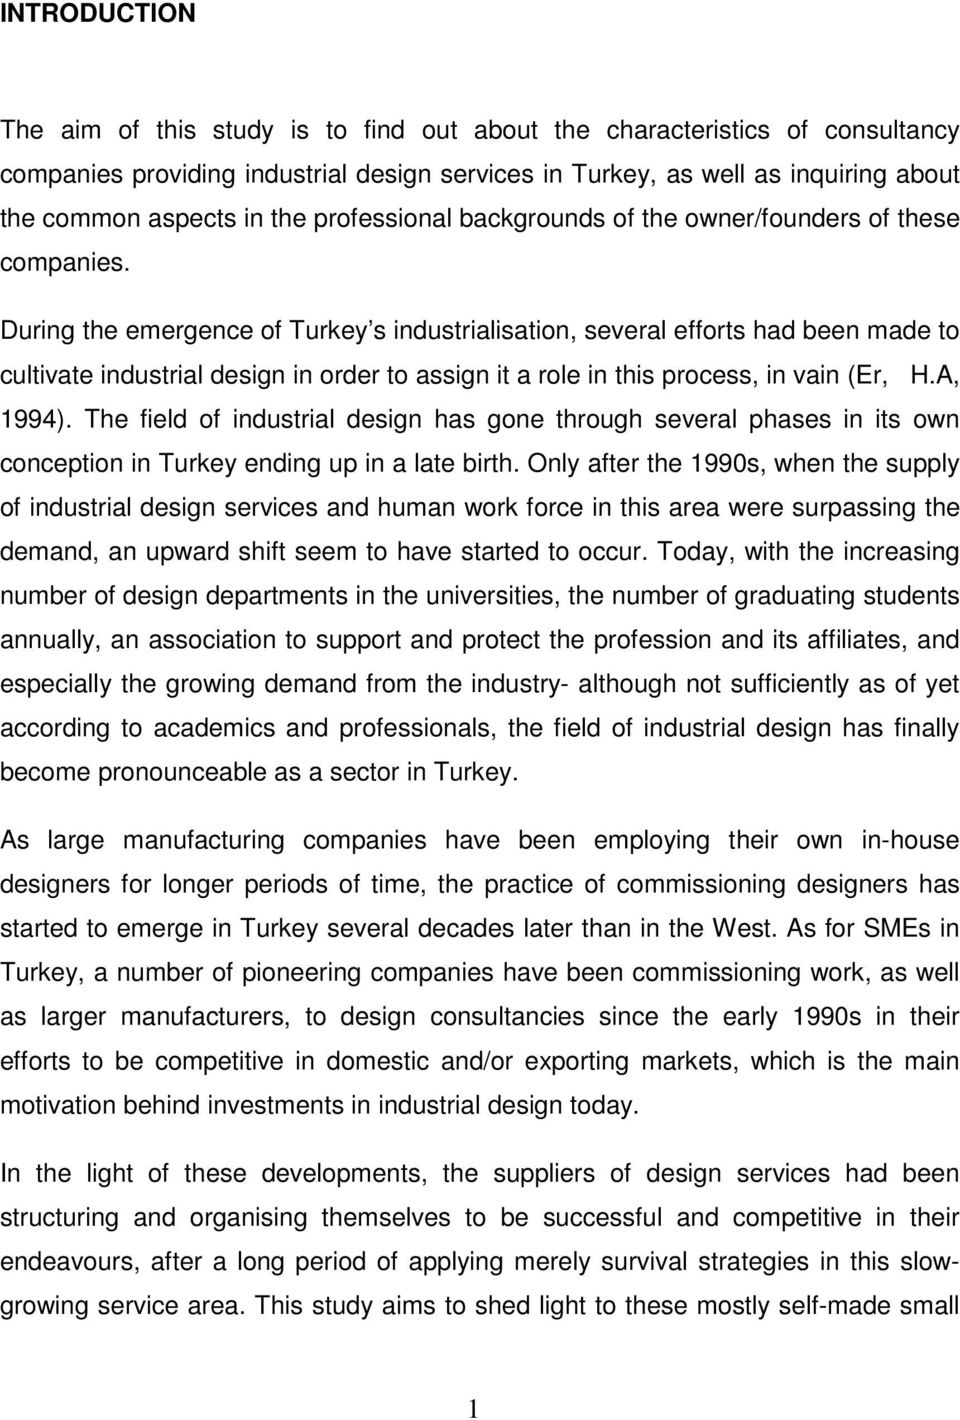 During the emergence of Turkey s industrialisation, several efforts had been made to cultivate industrial design in order to assign it a role in this process, in vain (Er, H.A, 1994).